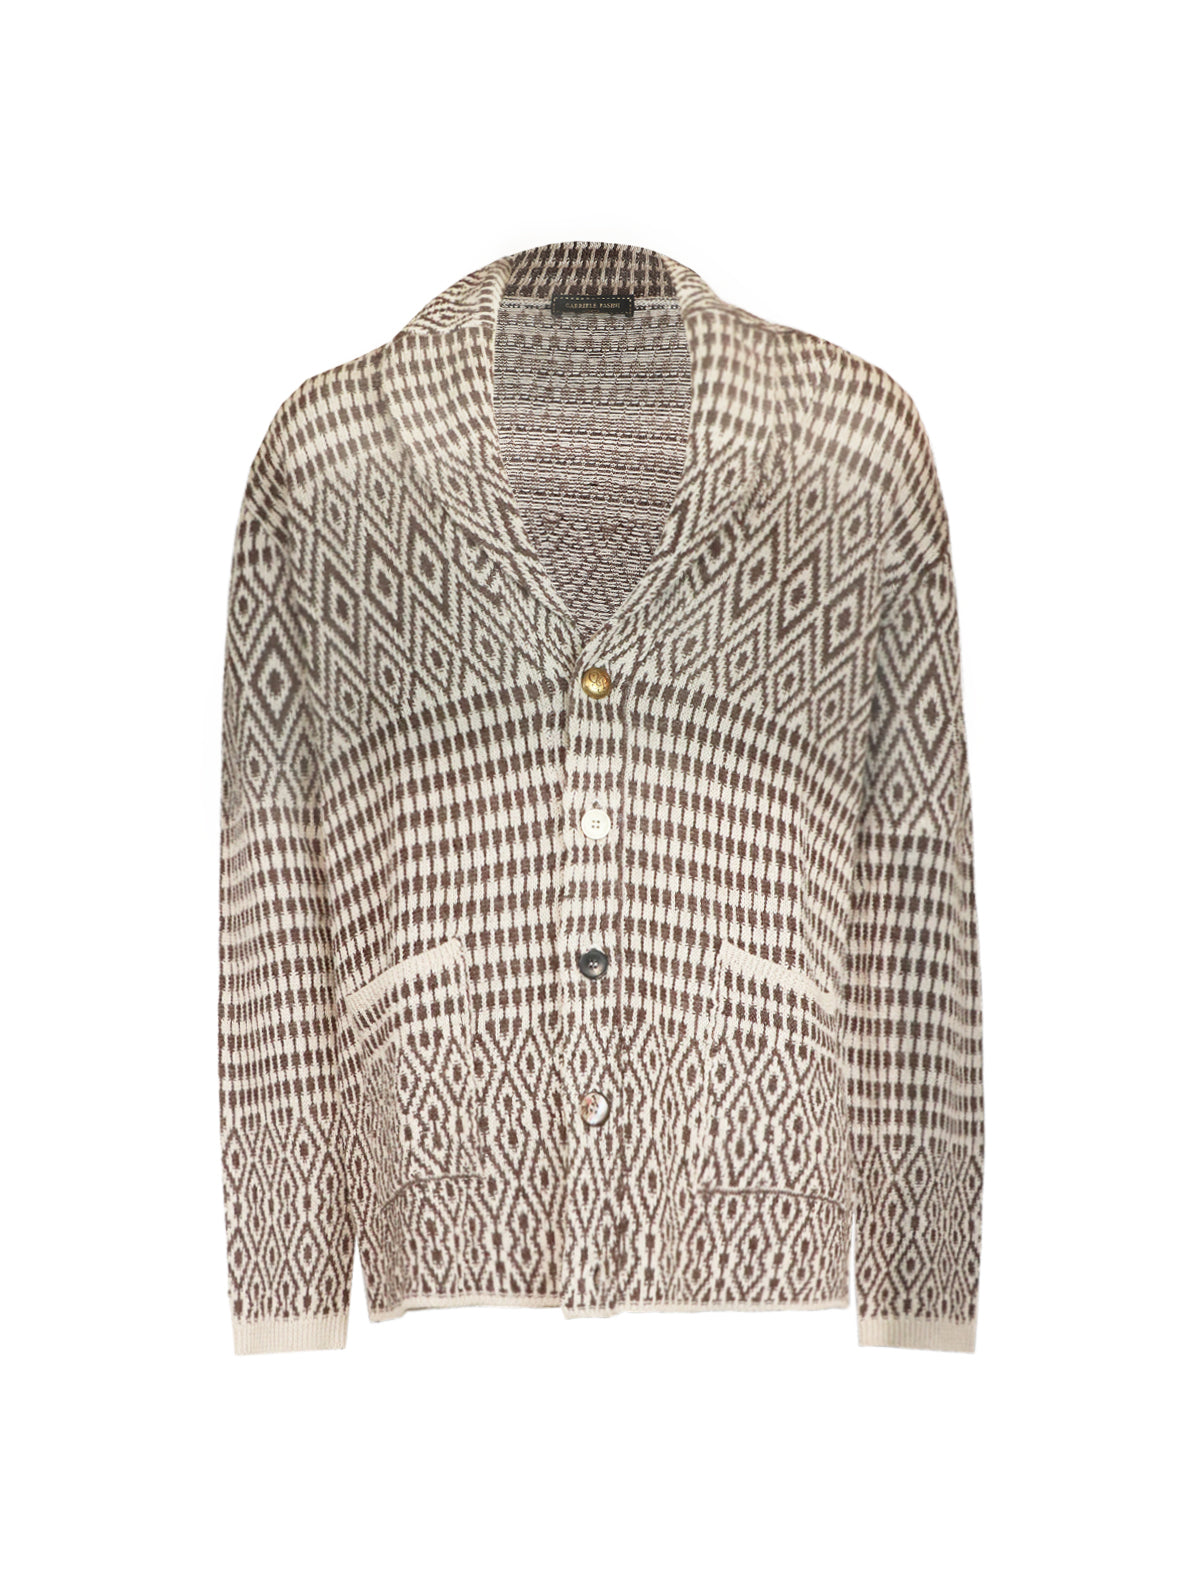 Gabriele Pasini Flax Cable Knit Cardigan in Patterned Grey-Brown